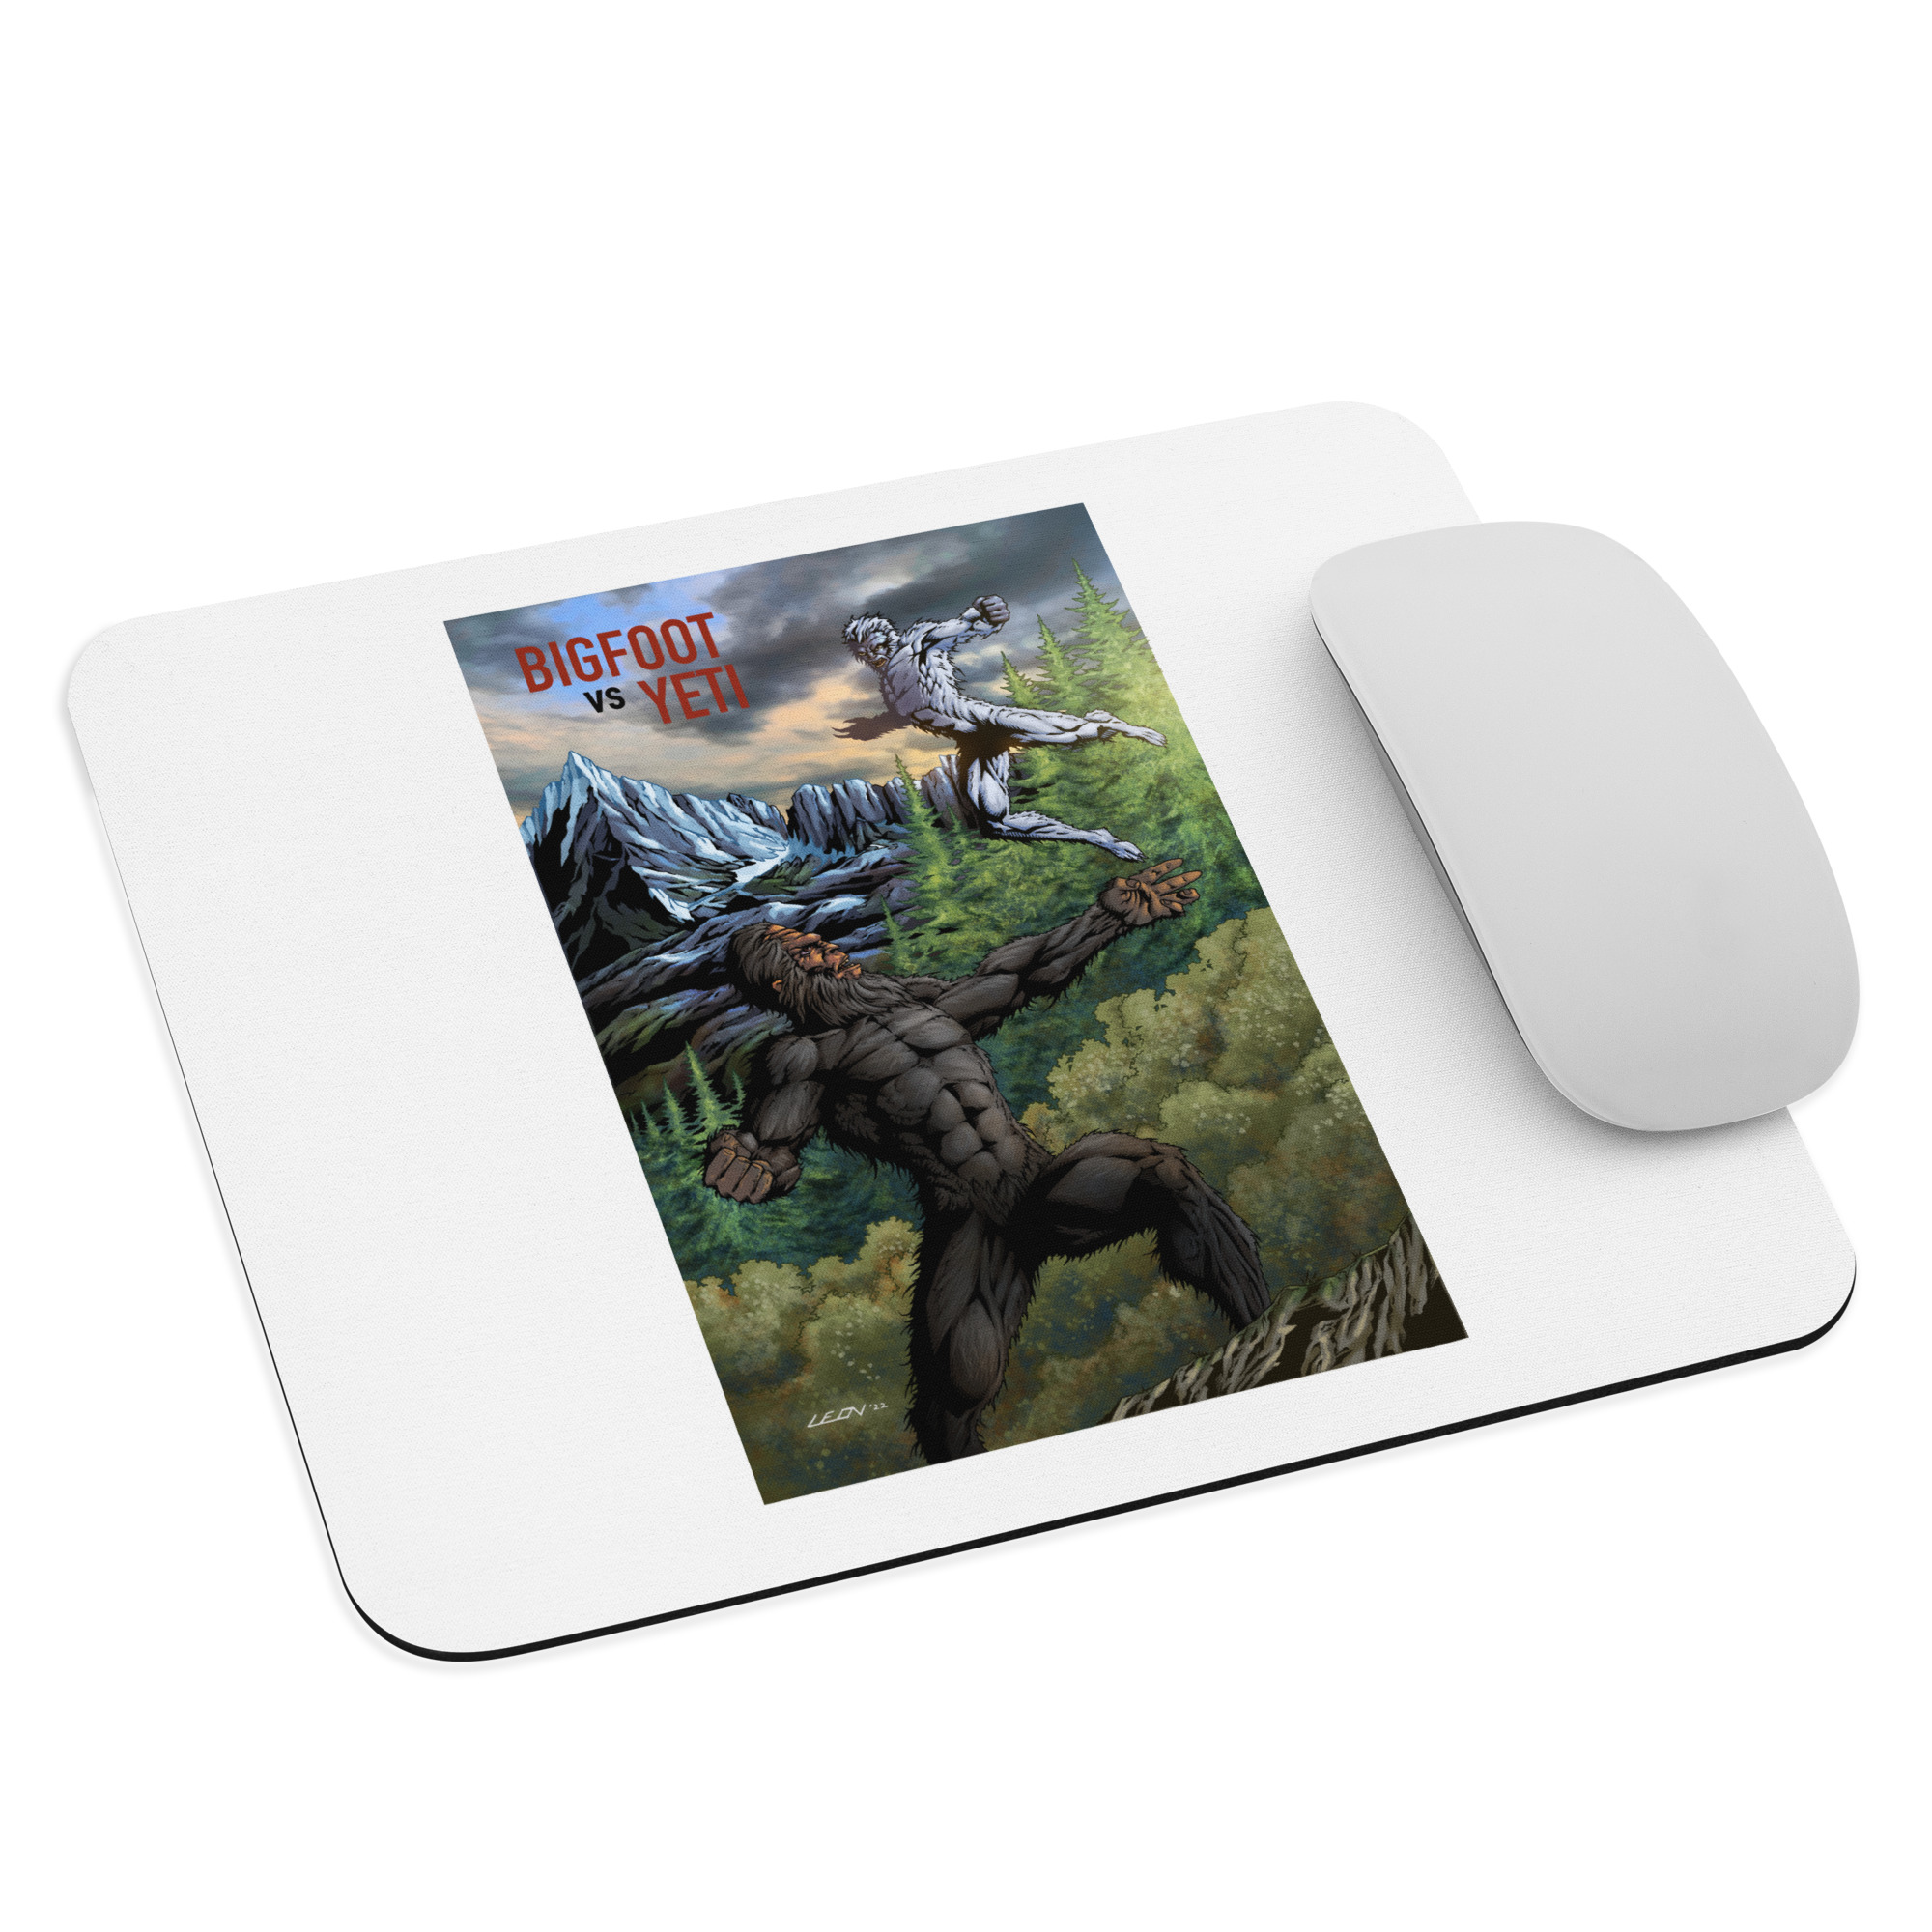 Bigfoot vs Yeti Mouse pad – From The Shadows Podcast